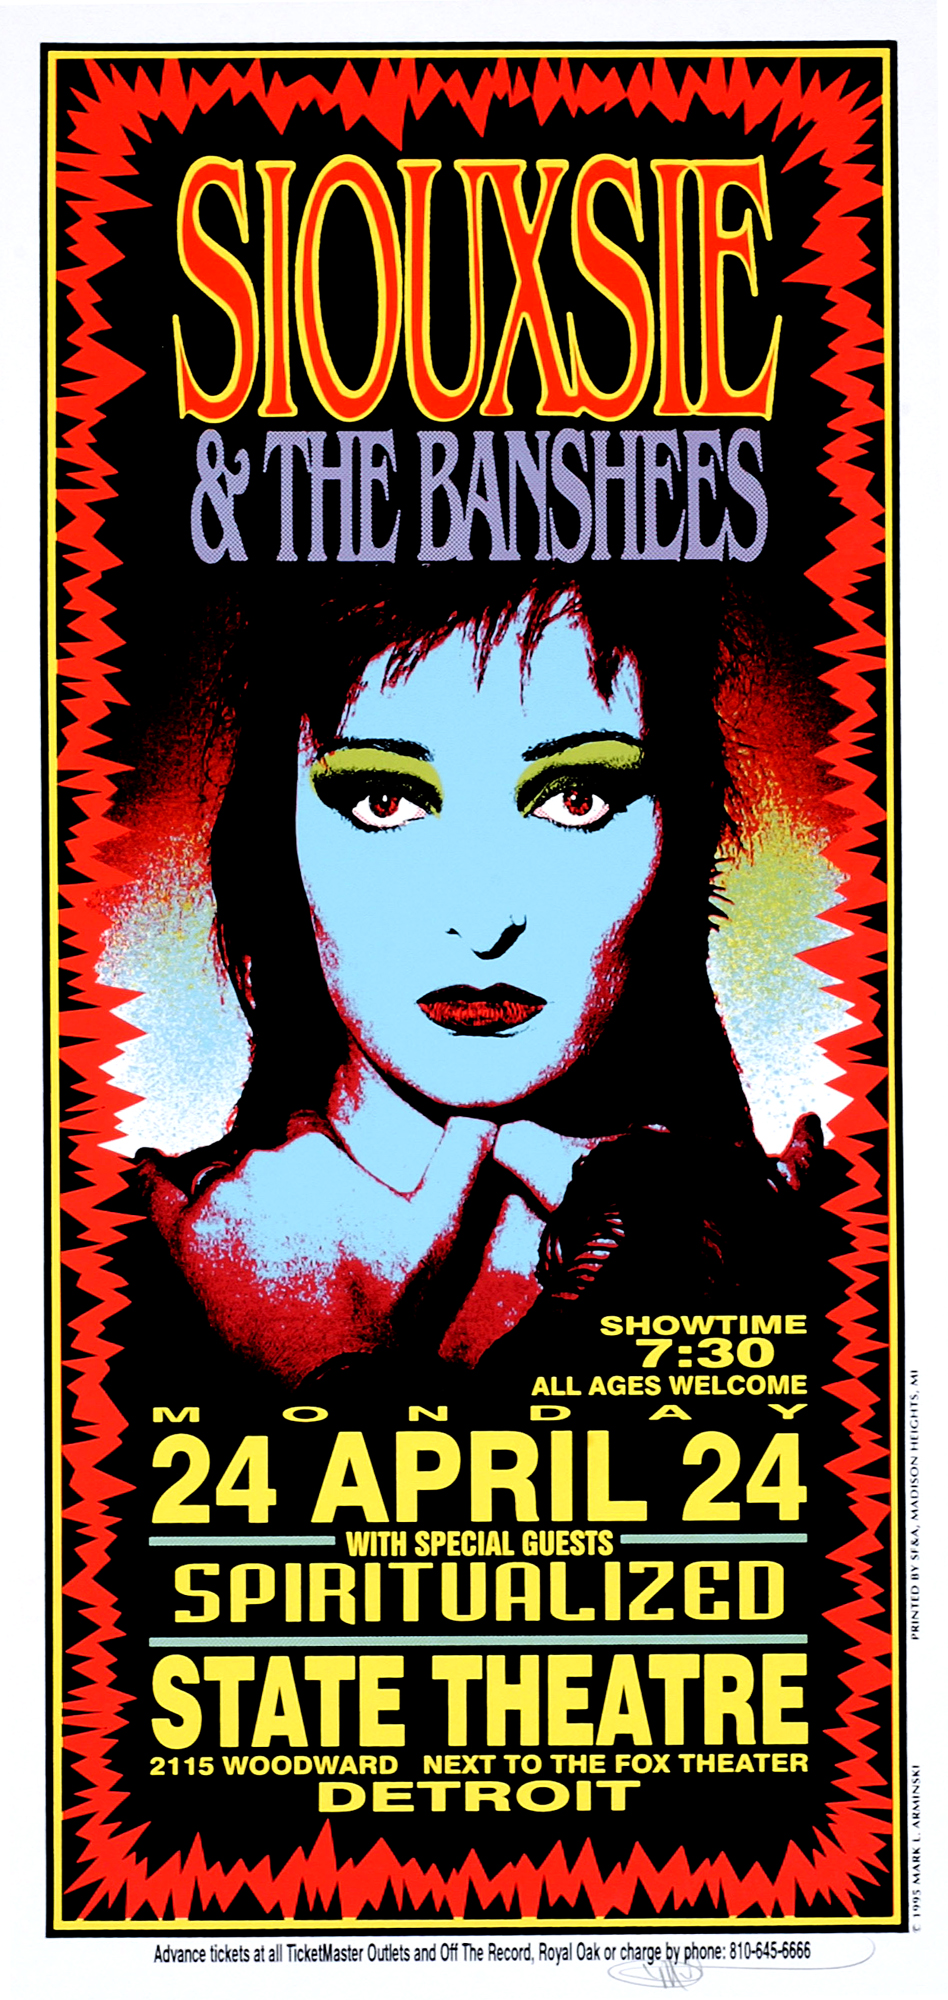 siouxsie and the banshees midi files